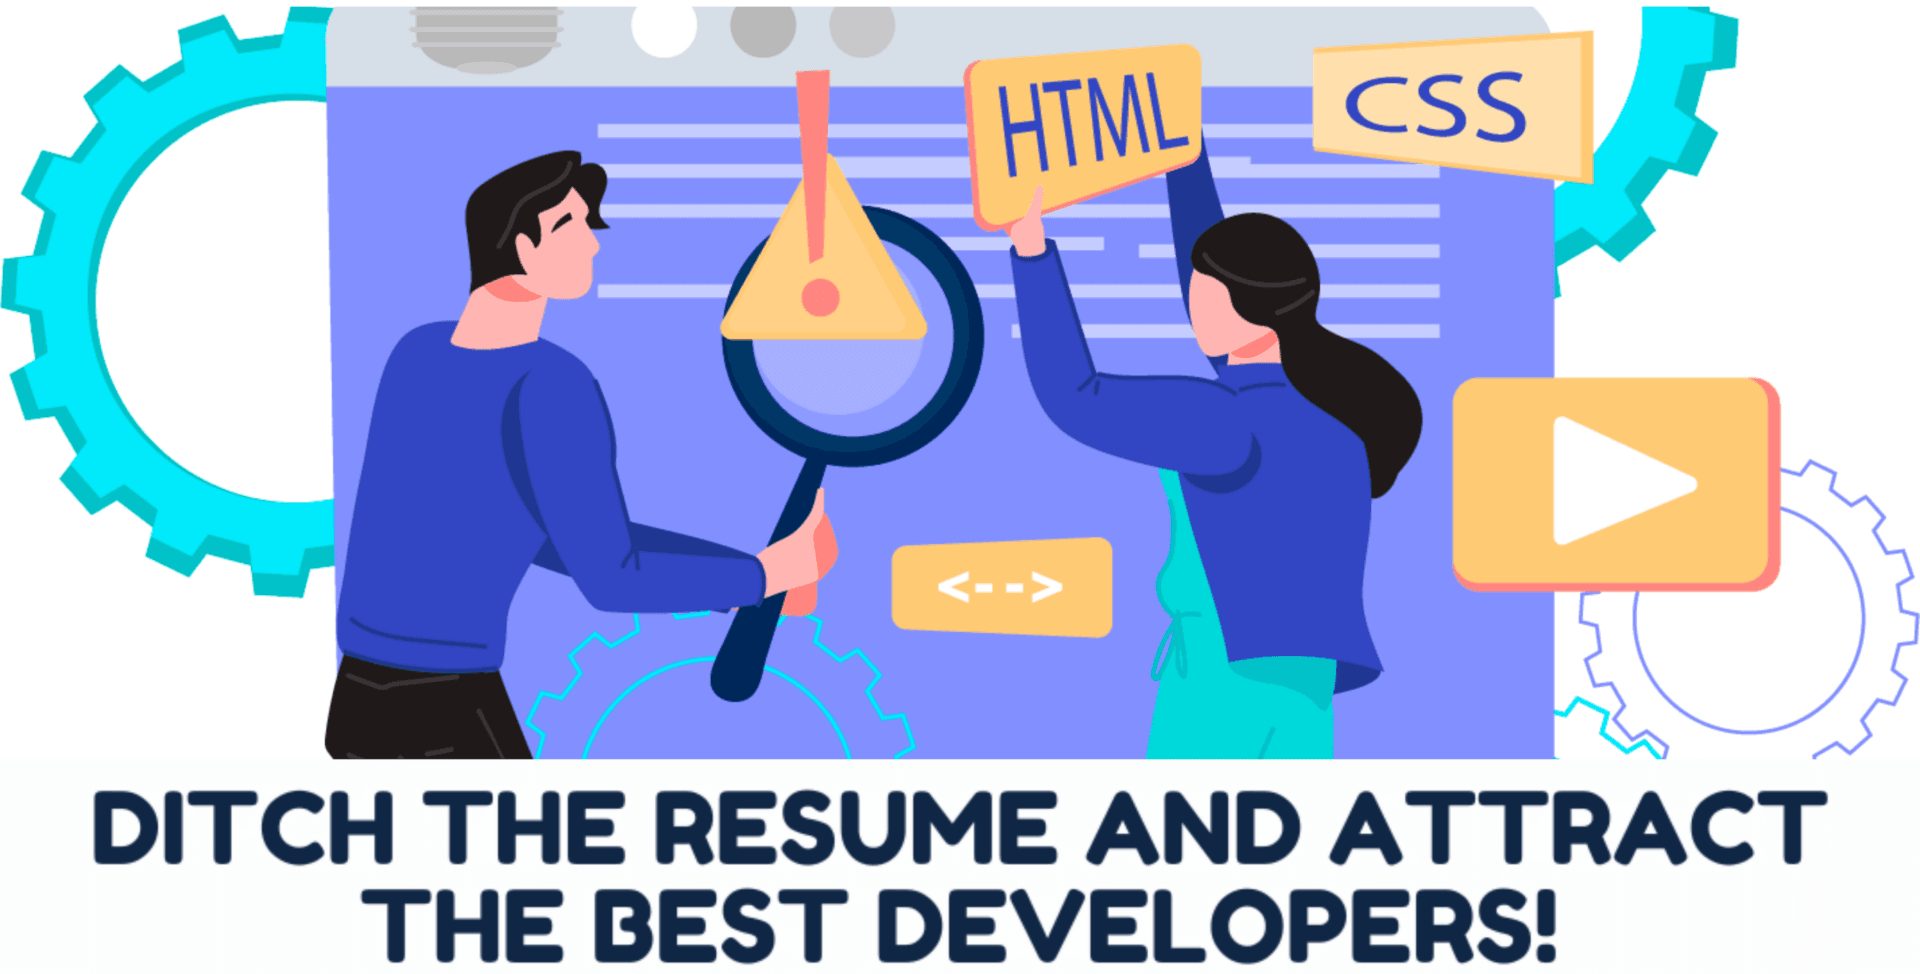 Ditch the resume and attract the best developers image